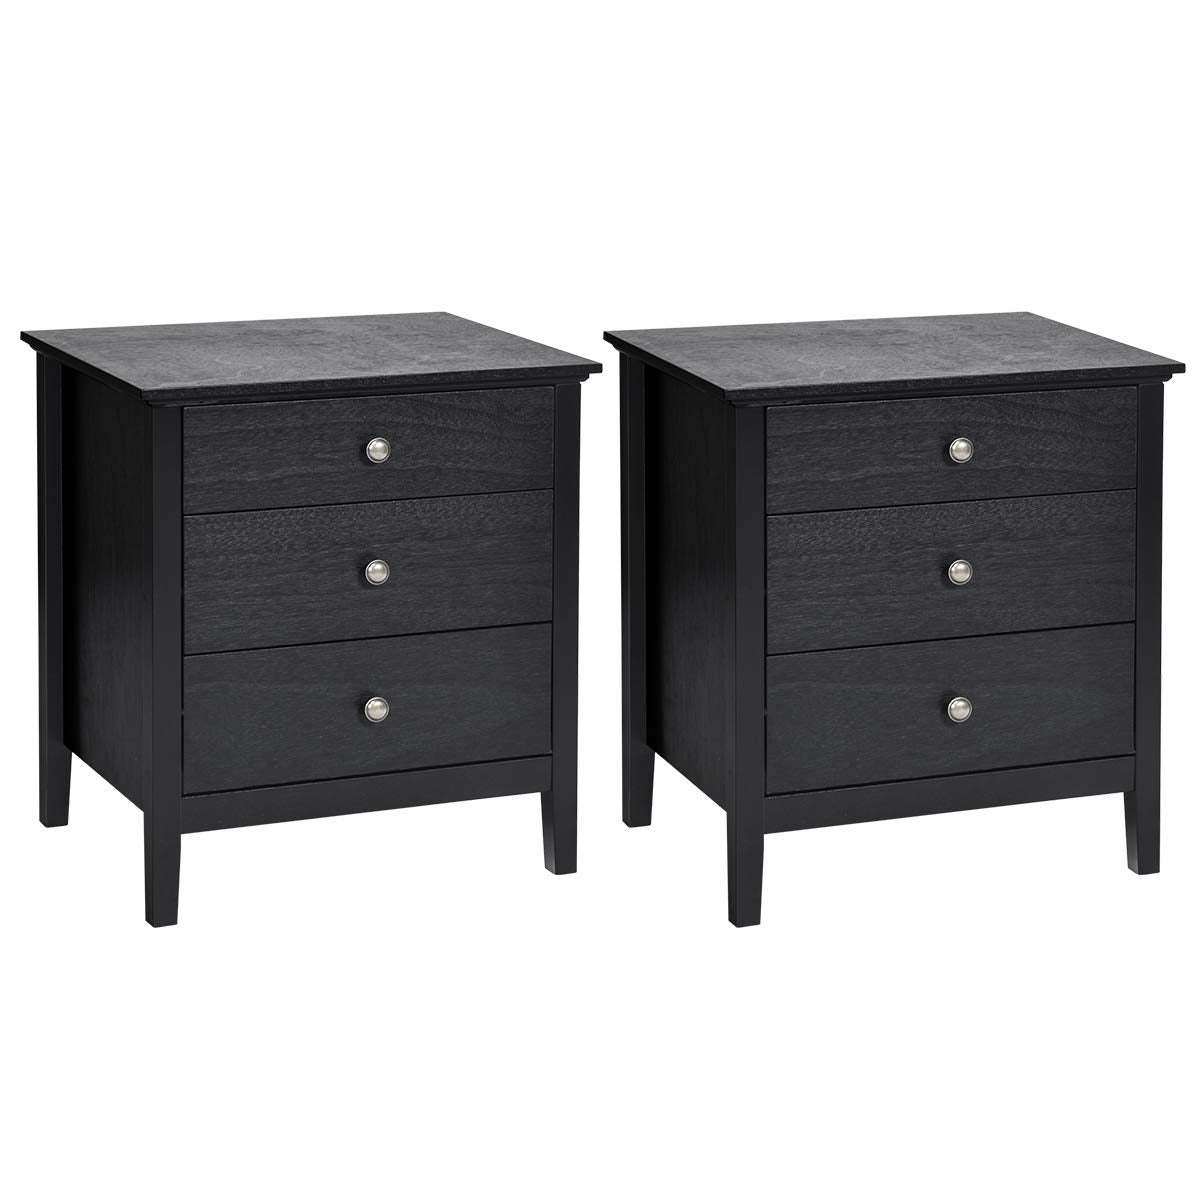 Giantex Nightstand with Drawers Solid Structure Side Table for Storage Bedroom